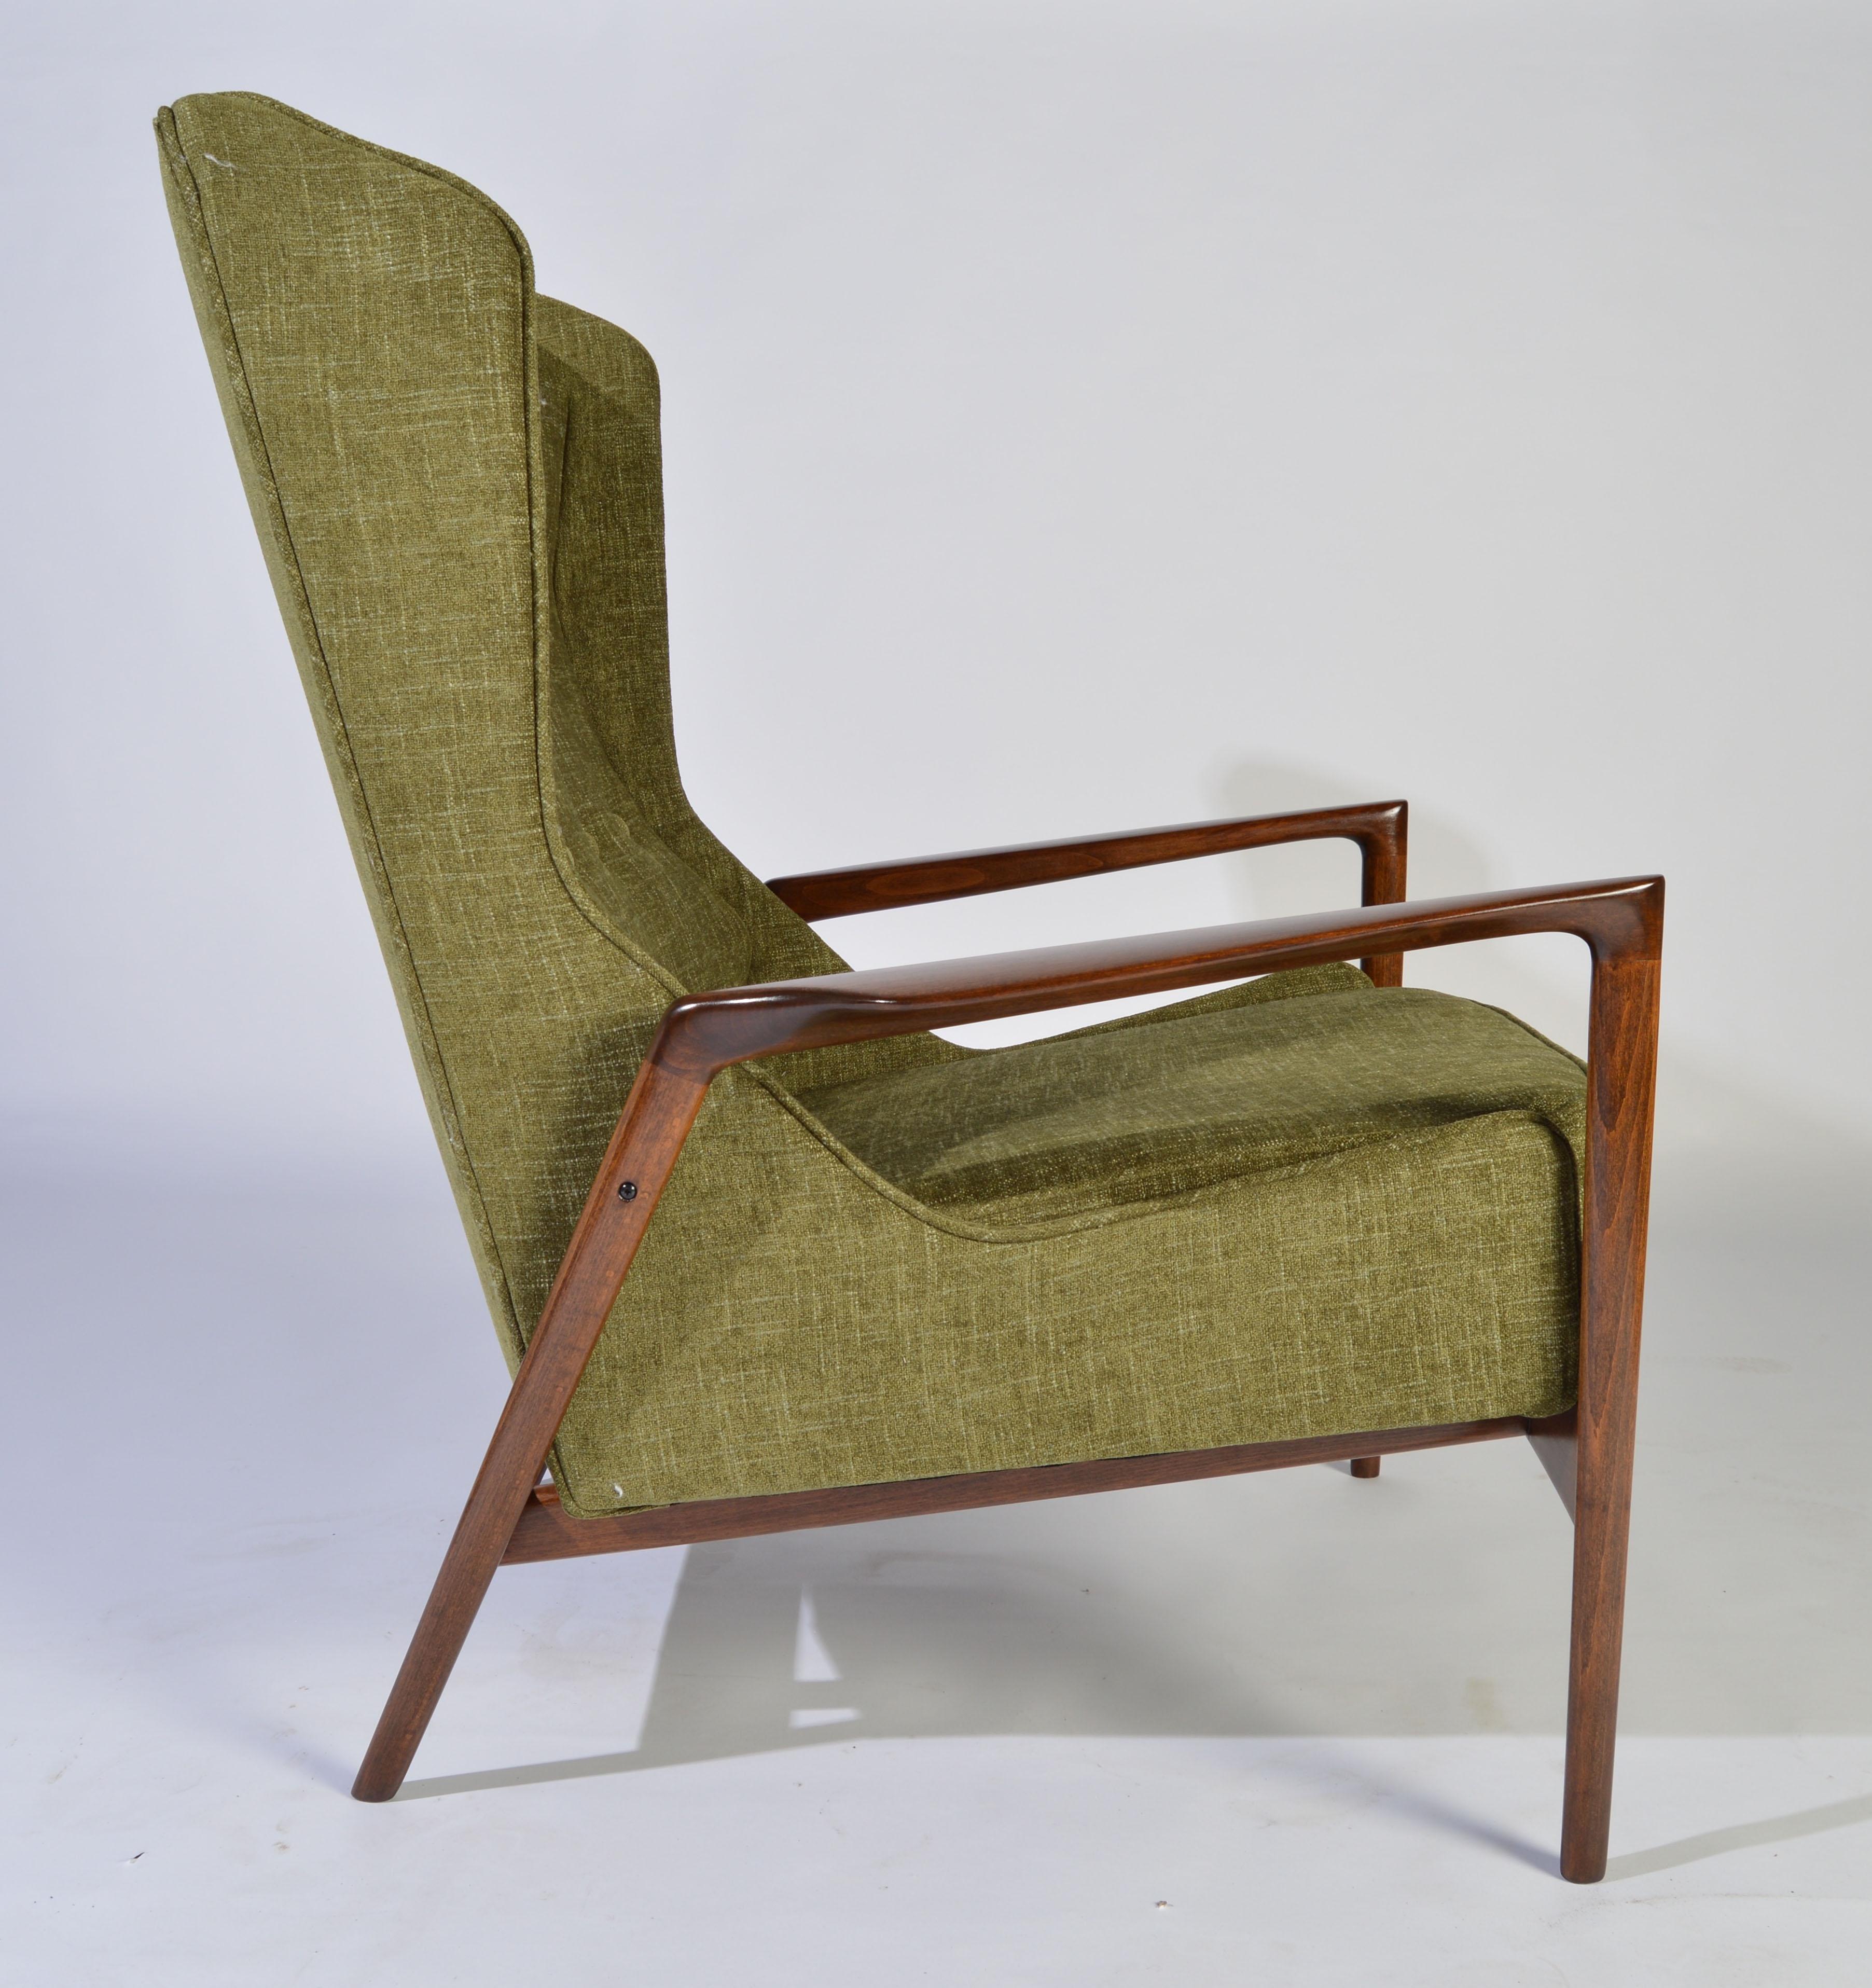 An elegant example of IB Kofod-Larsen’s design ability and vision. Having a sculptural beech frame with tufted backrest newly upholstered in a durable yet soft green fabric. New cushioning throughout as well.
Excellent condition throughout. Study